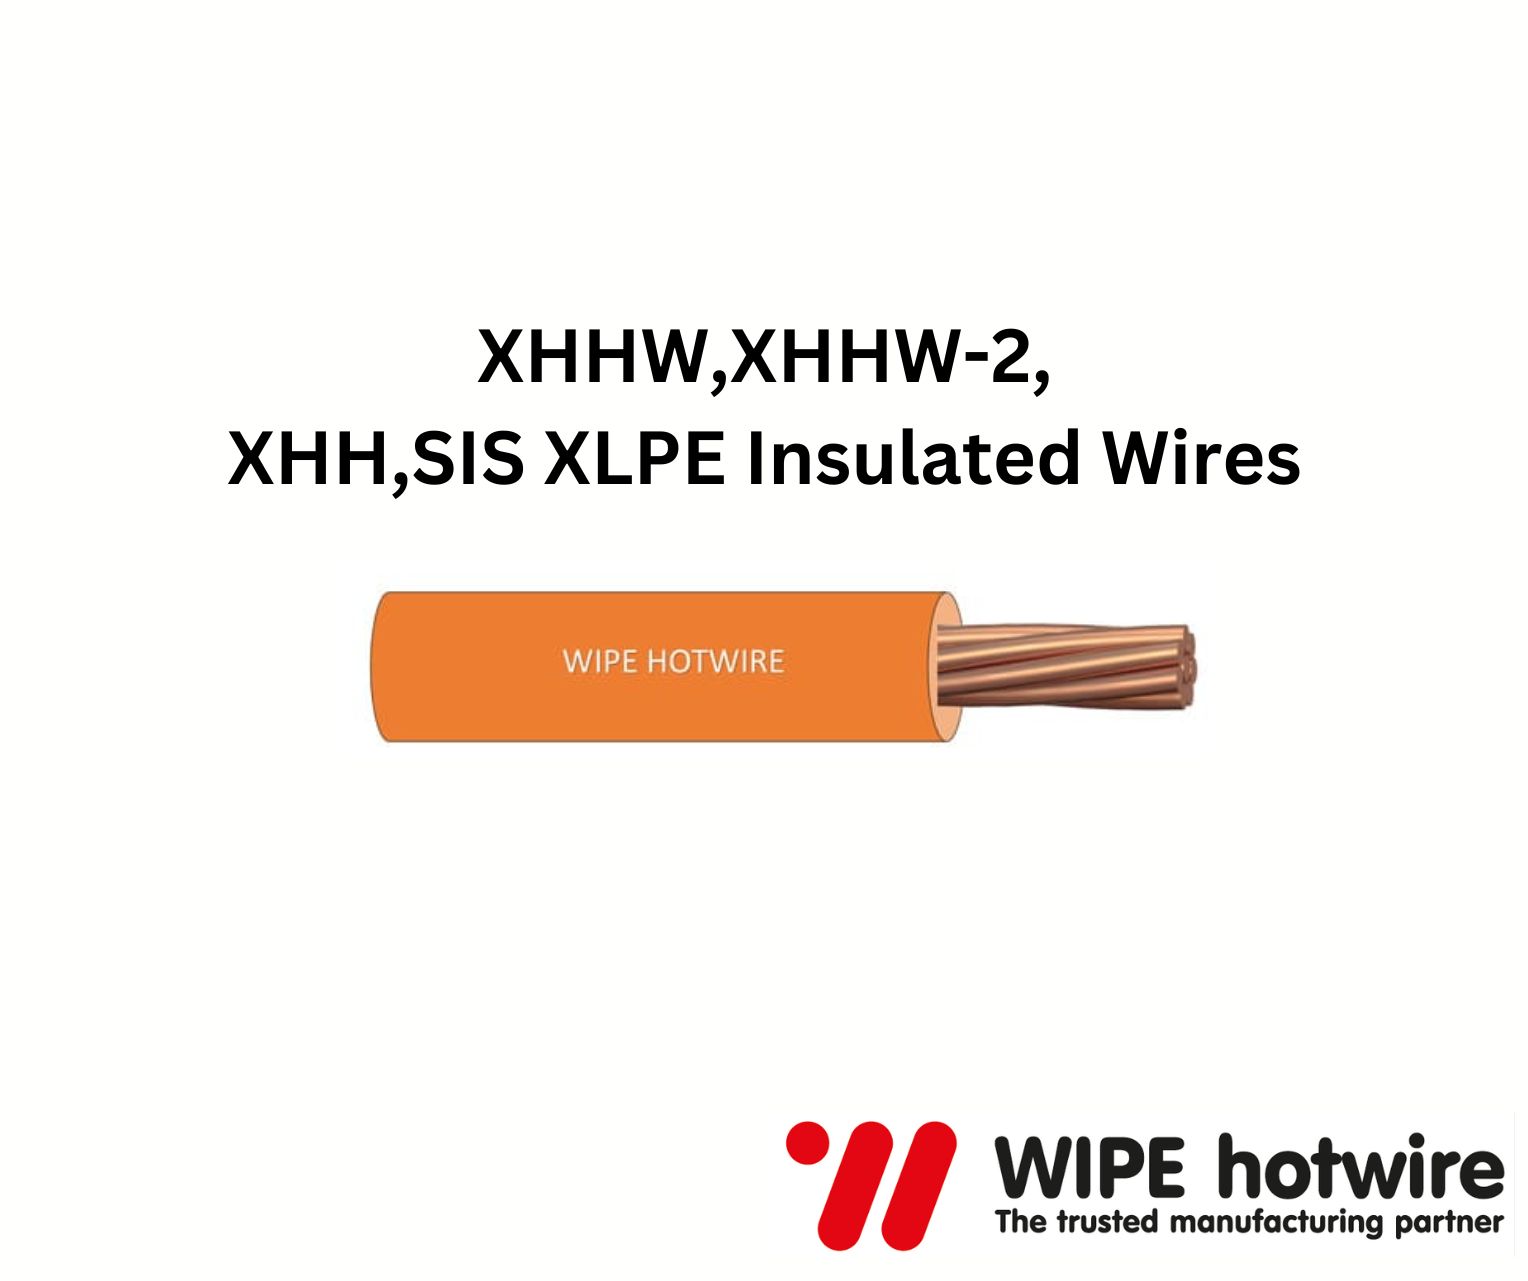 XHHW-2 Insulated Wires